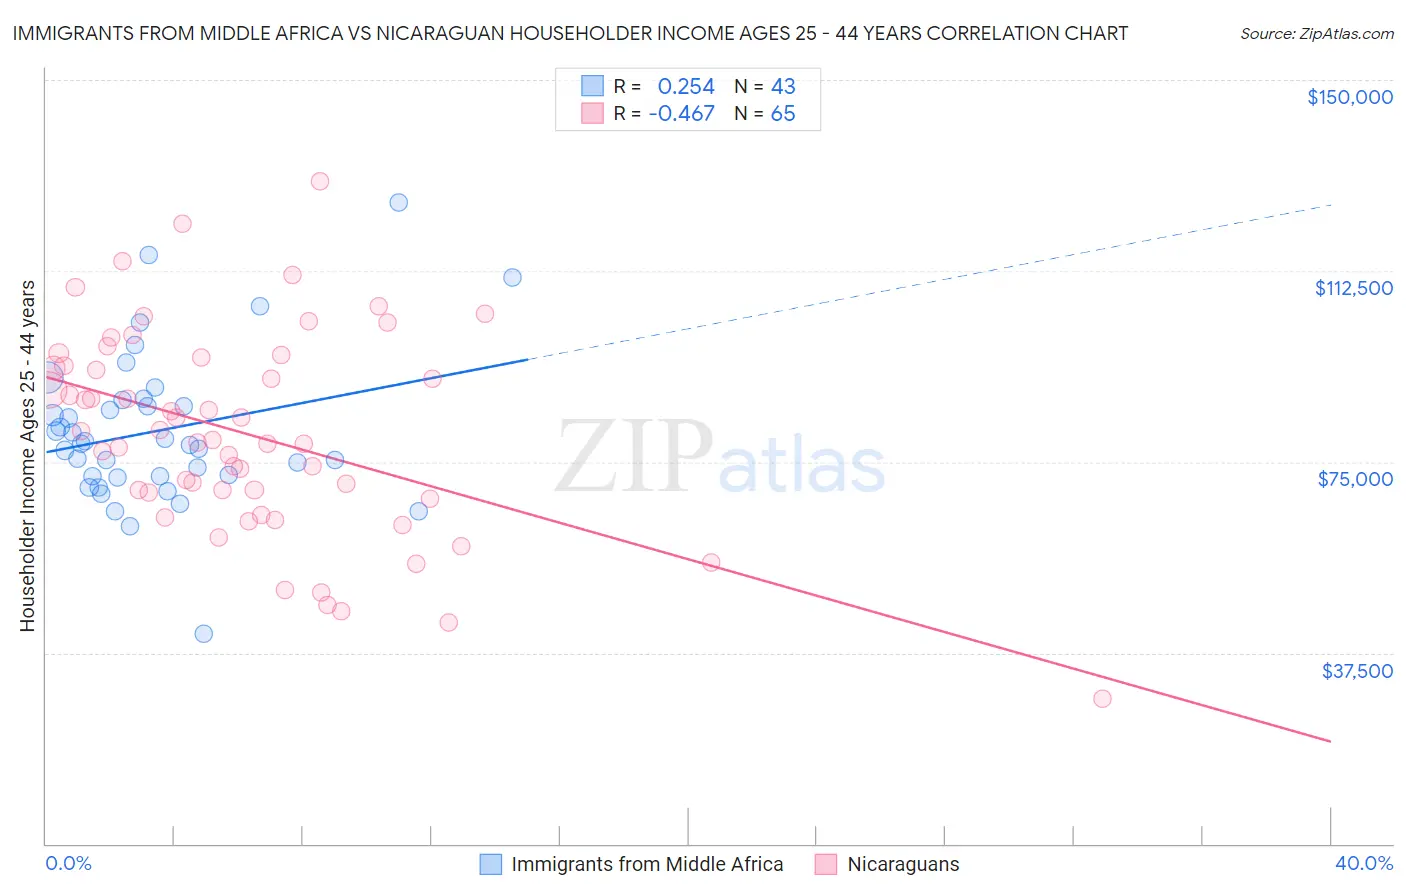 Immigrants from Middle Africa vs Nicaraguan Householder Income Ages 25 - 44 years